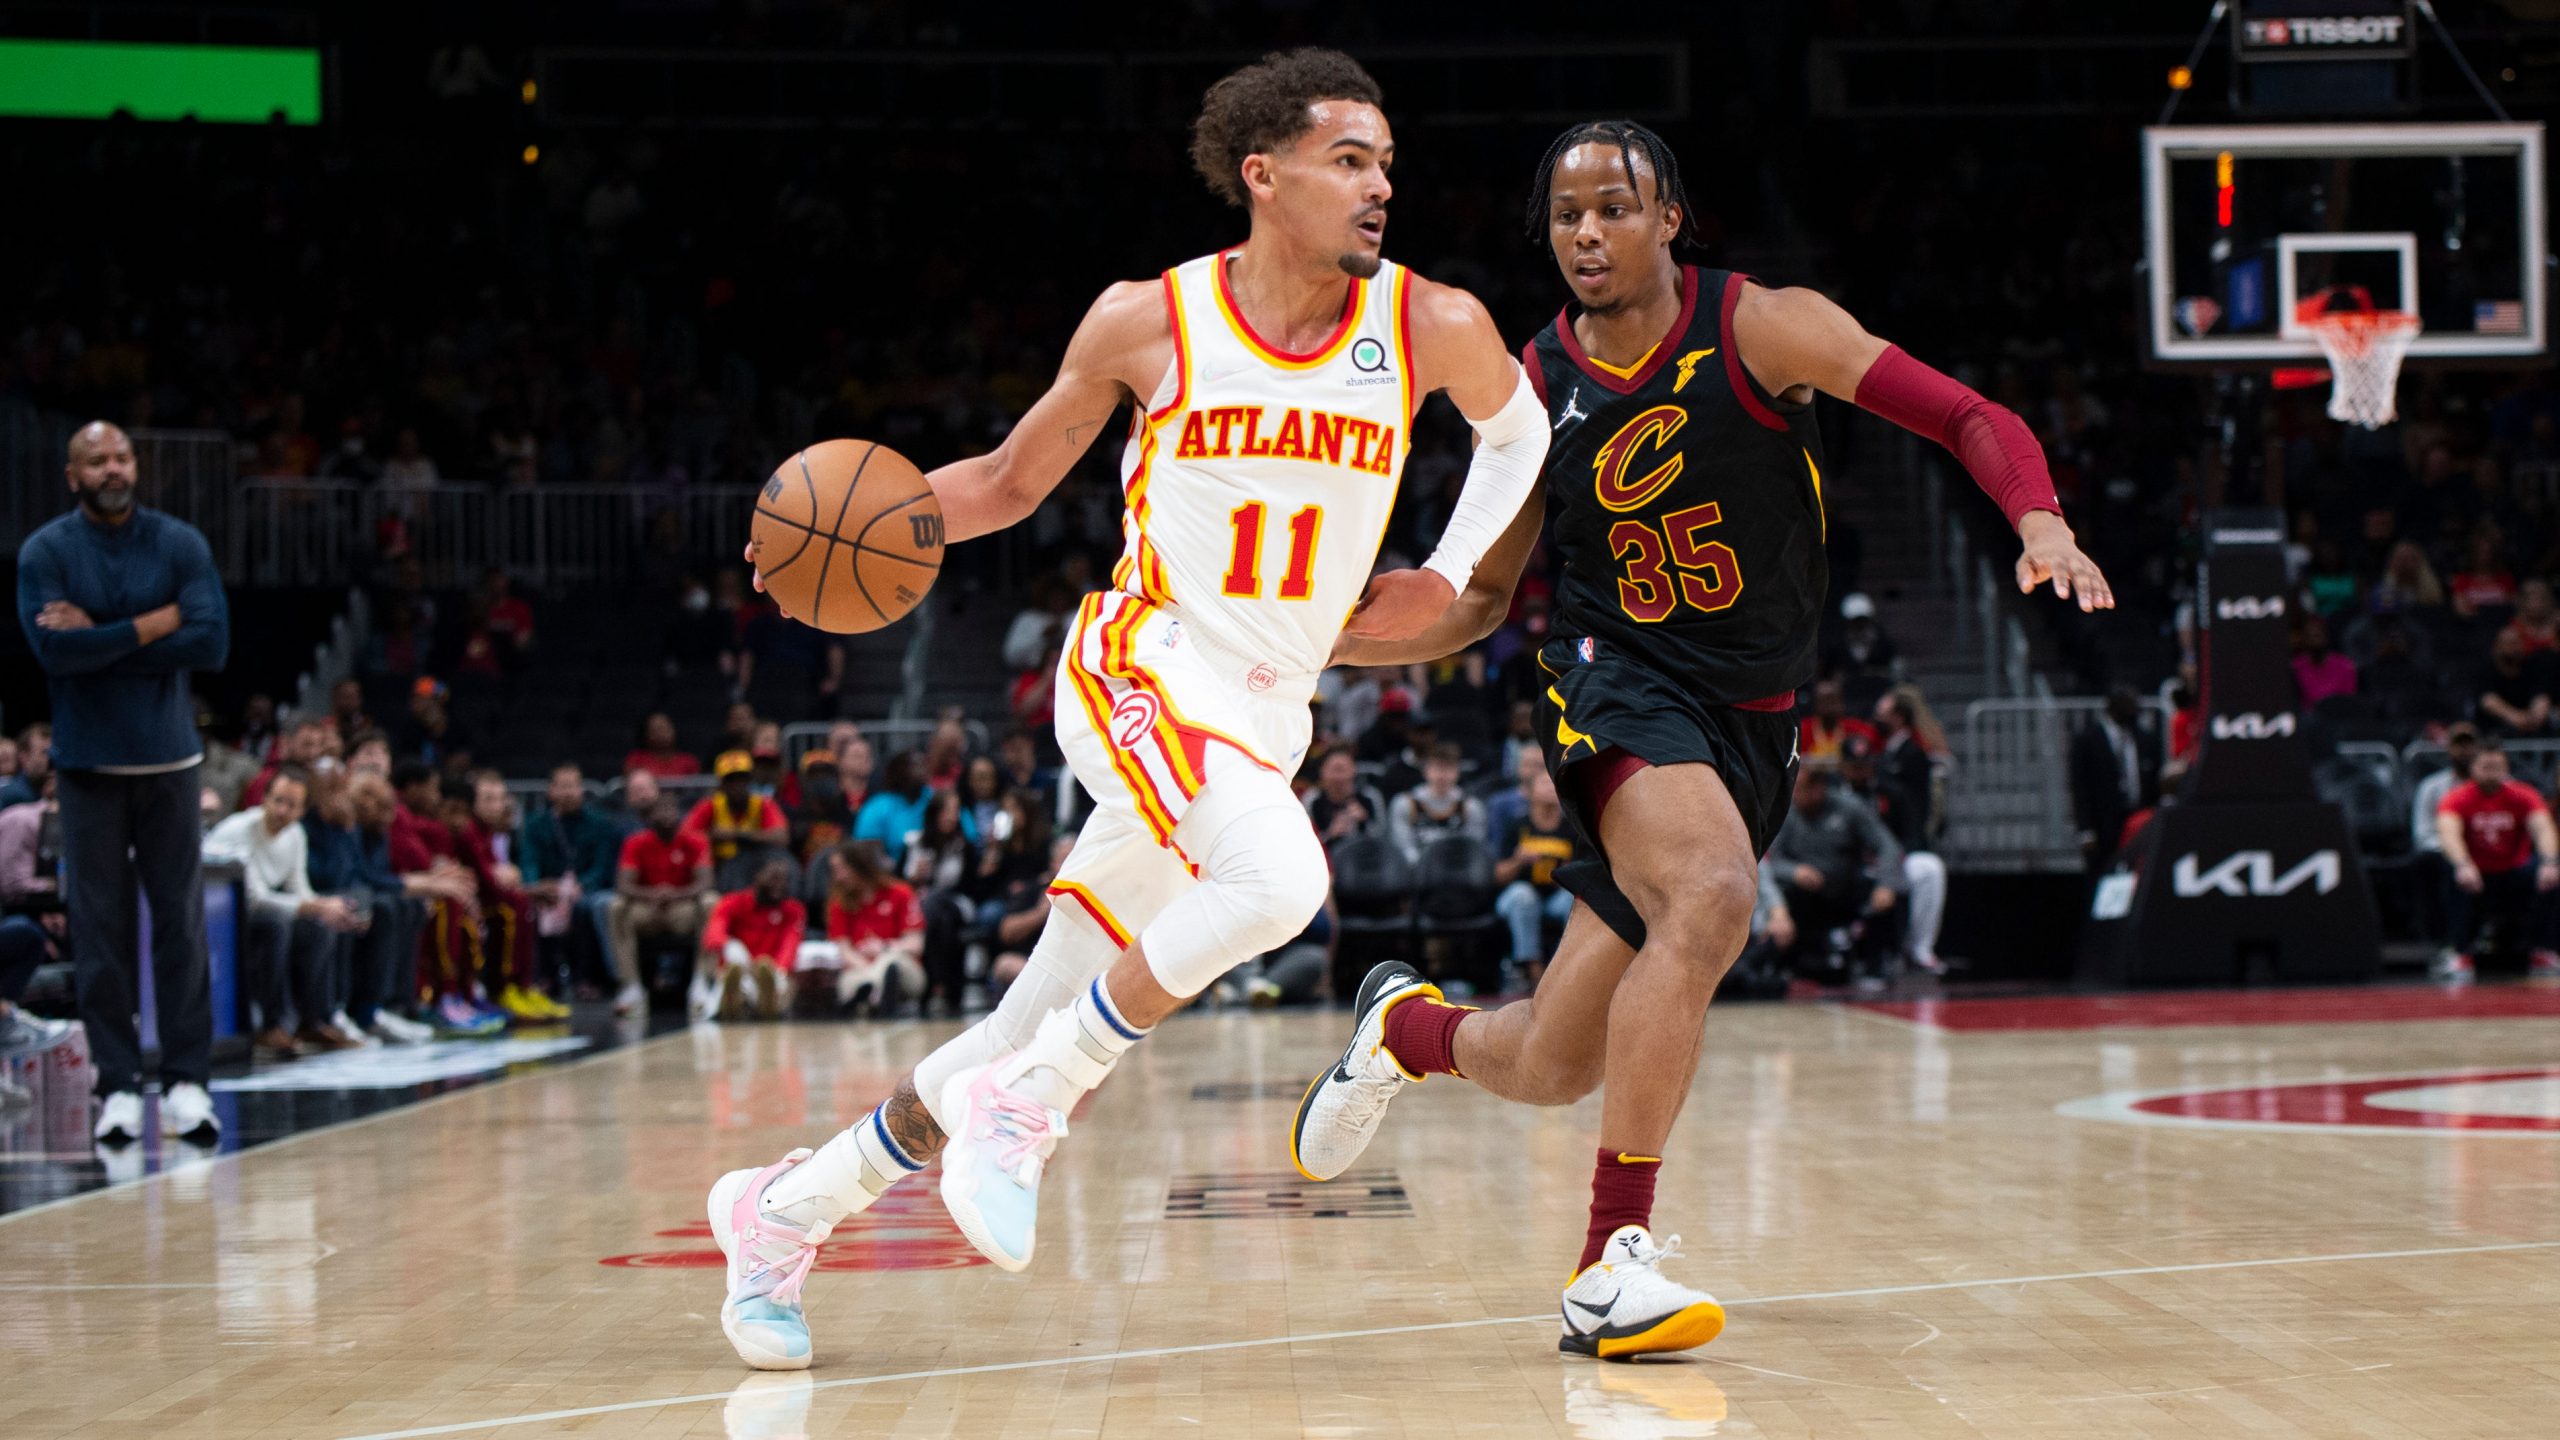 NBA: Trae Young leads surging Atlanta Hawks past struggling Cavaliers 131-107